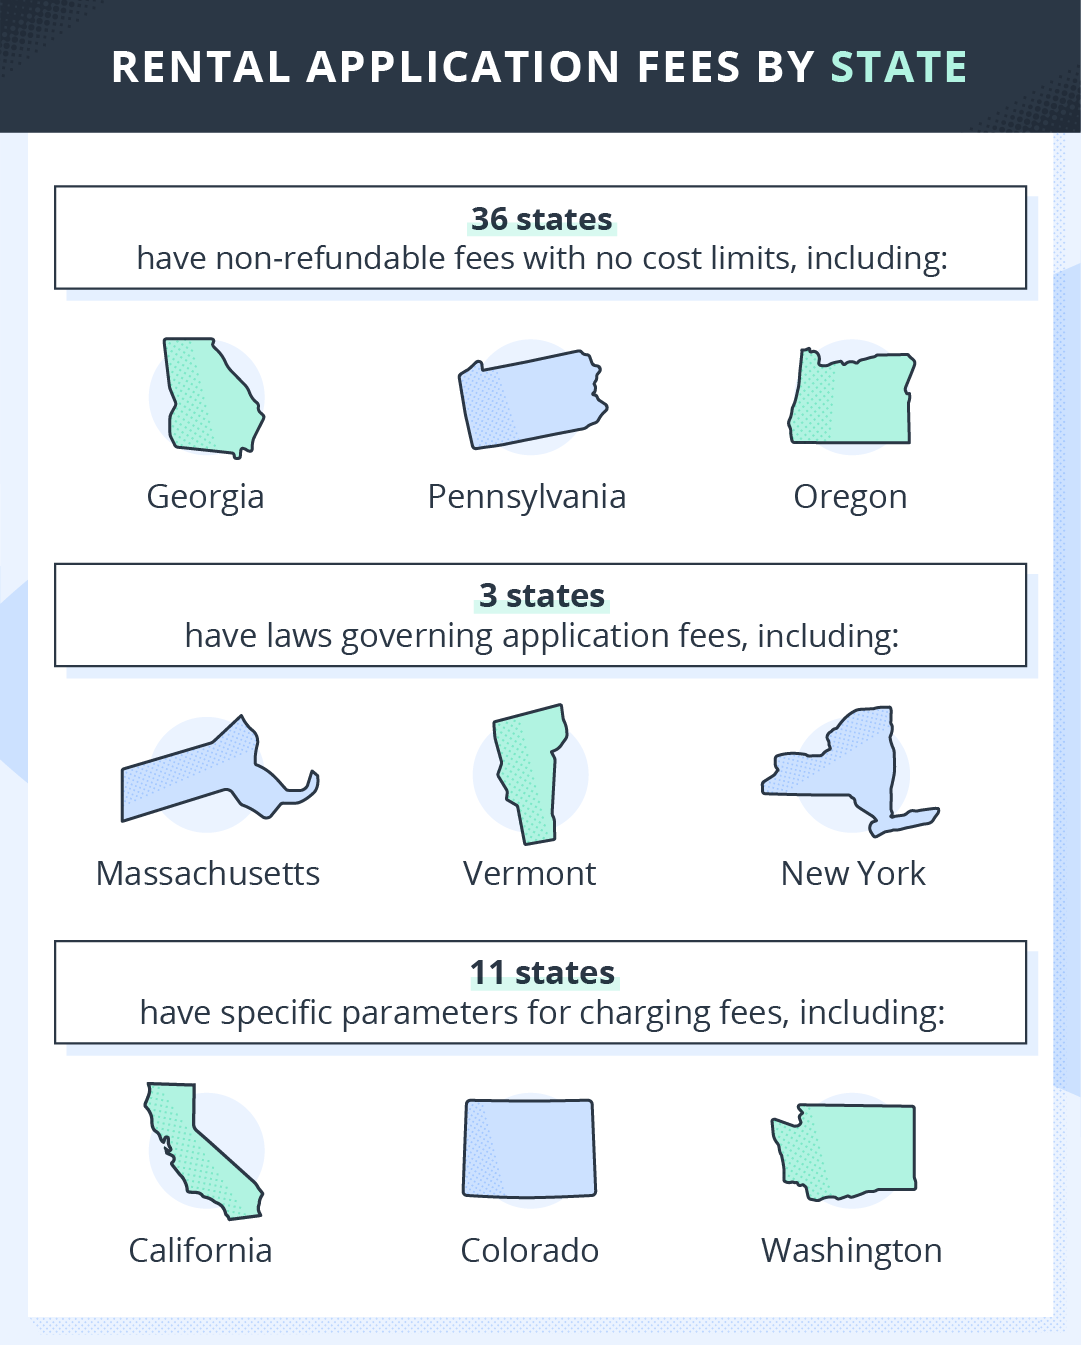 Rental application fees by state. 36 states, including Georgia, Pennsylvania, and Oregon, have non-refundable application fees with no cost limits. Three states have laws governing application fees (Massachusetts, Vermont, New York). 11 states have specific parameters for charging fees, including California, Colorado, and Washington.